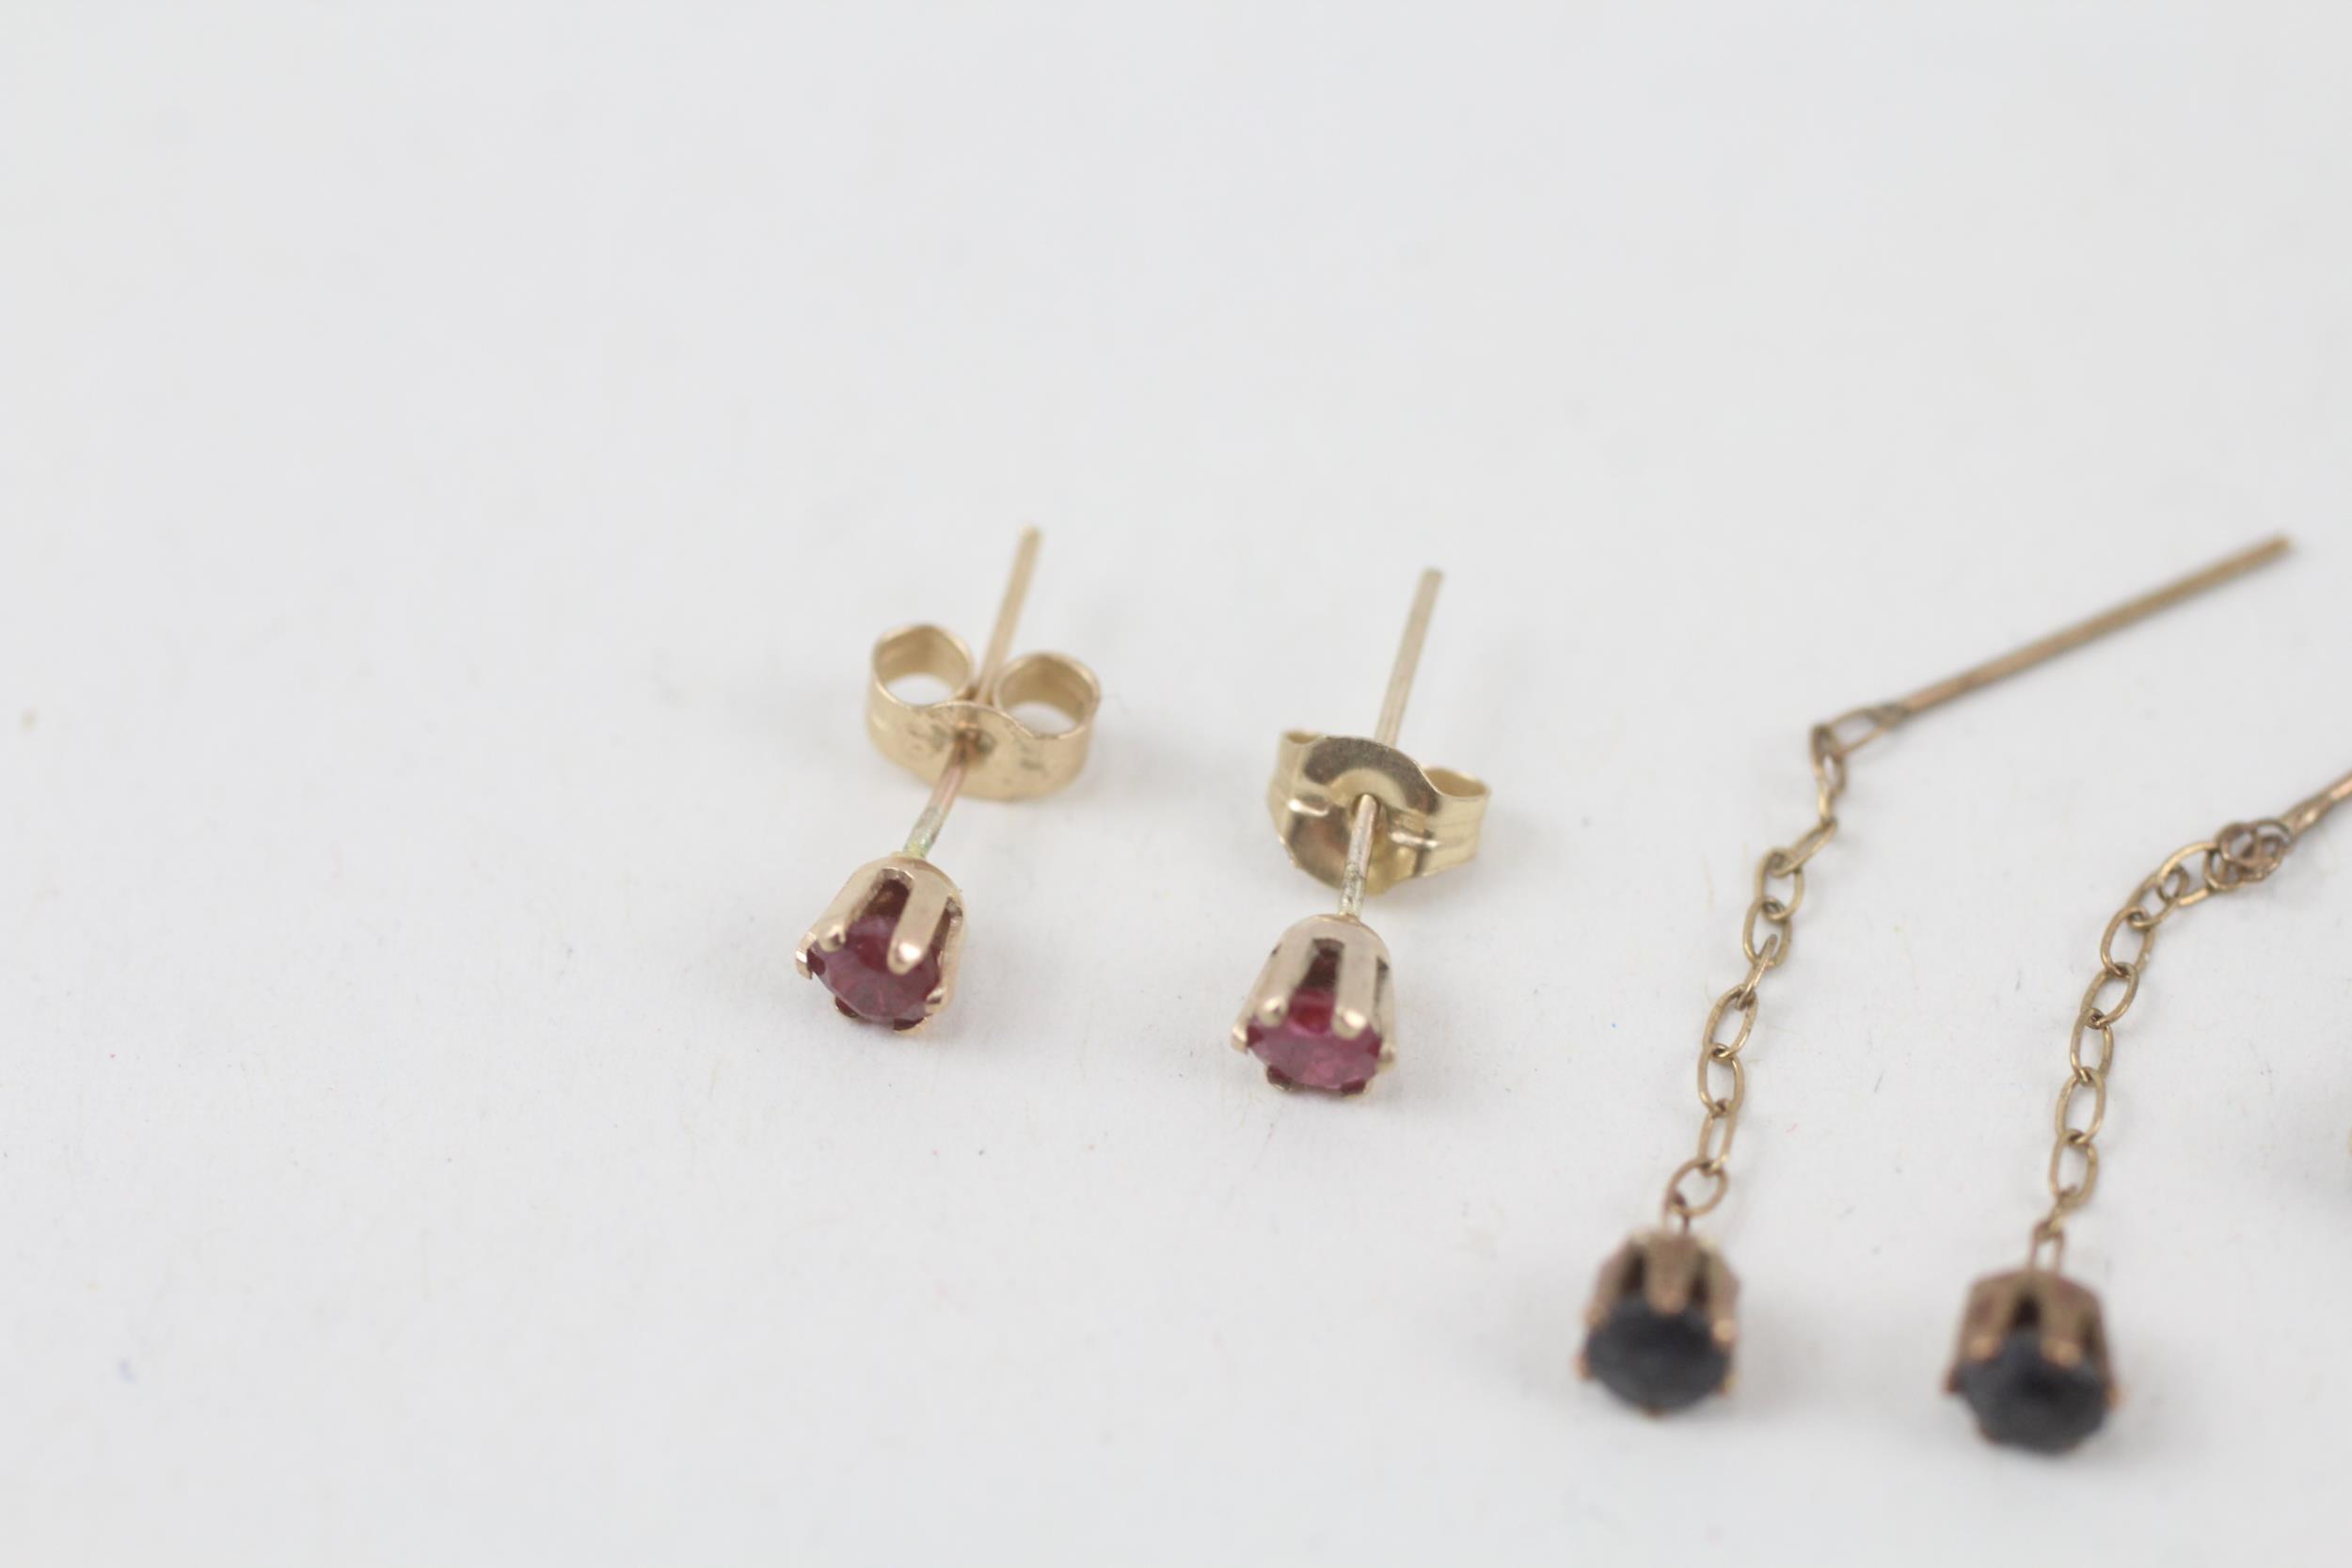 3x 9ct gold sapphire & ruby earrings - 0.8 g - Image 2 of 6